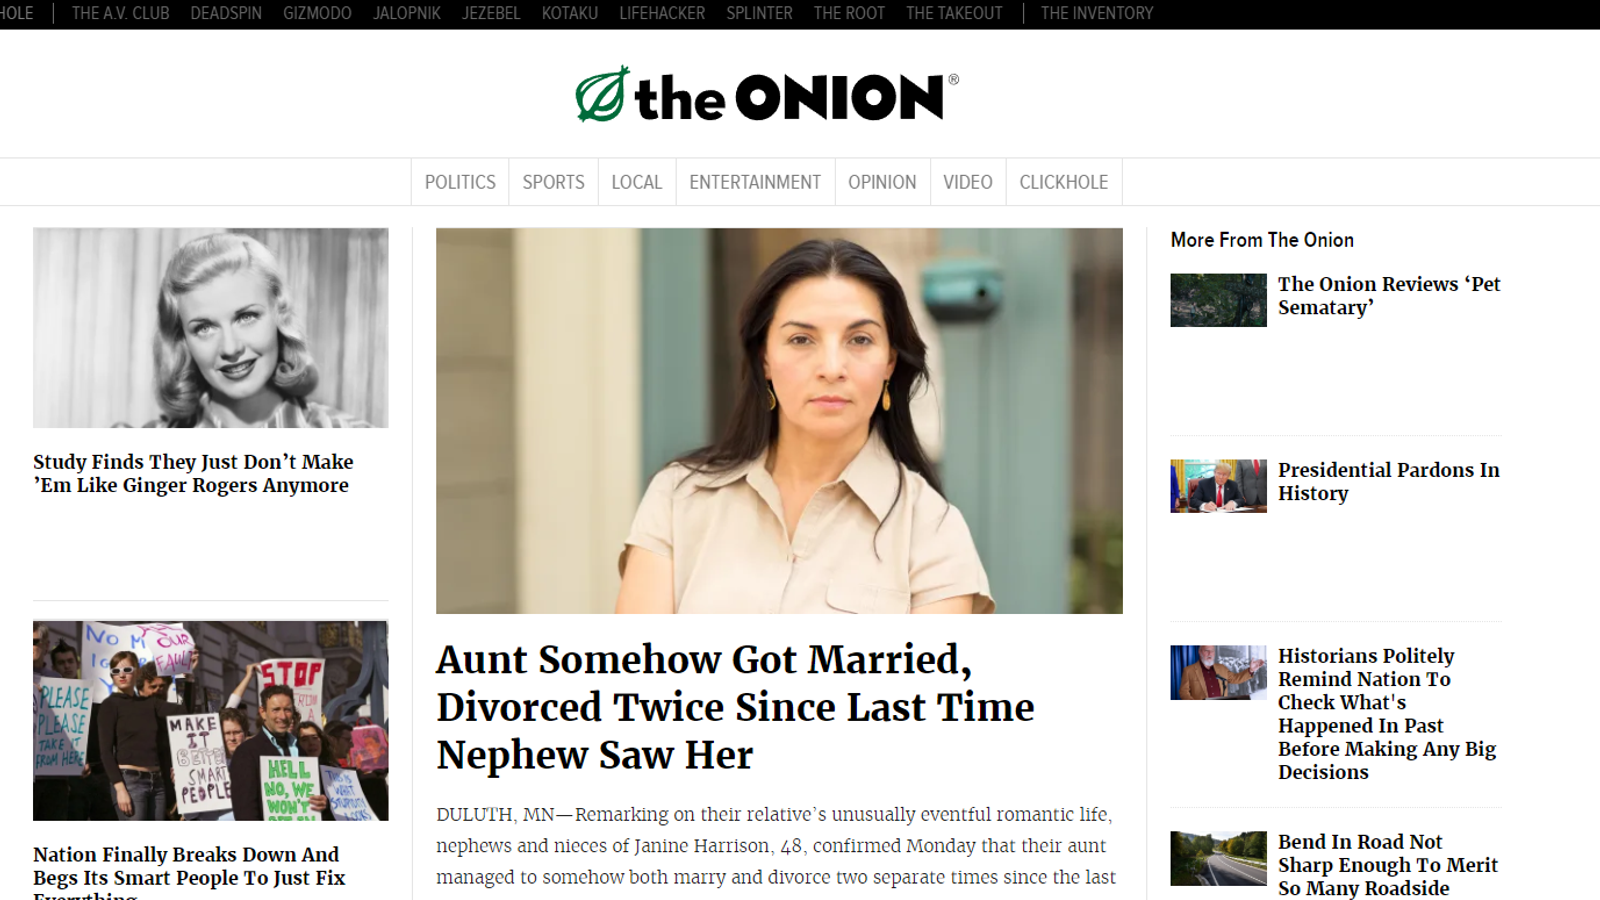 Univision slices into 'Onion' ownership